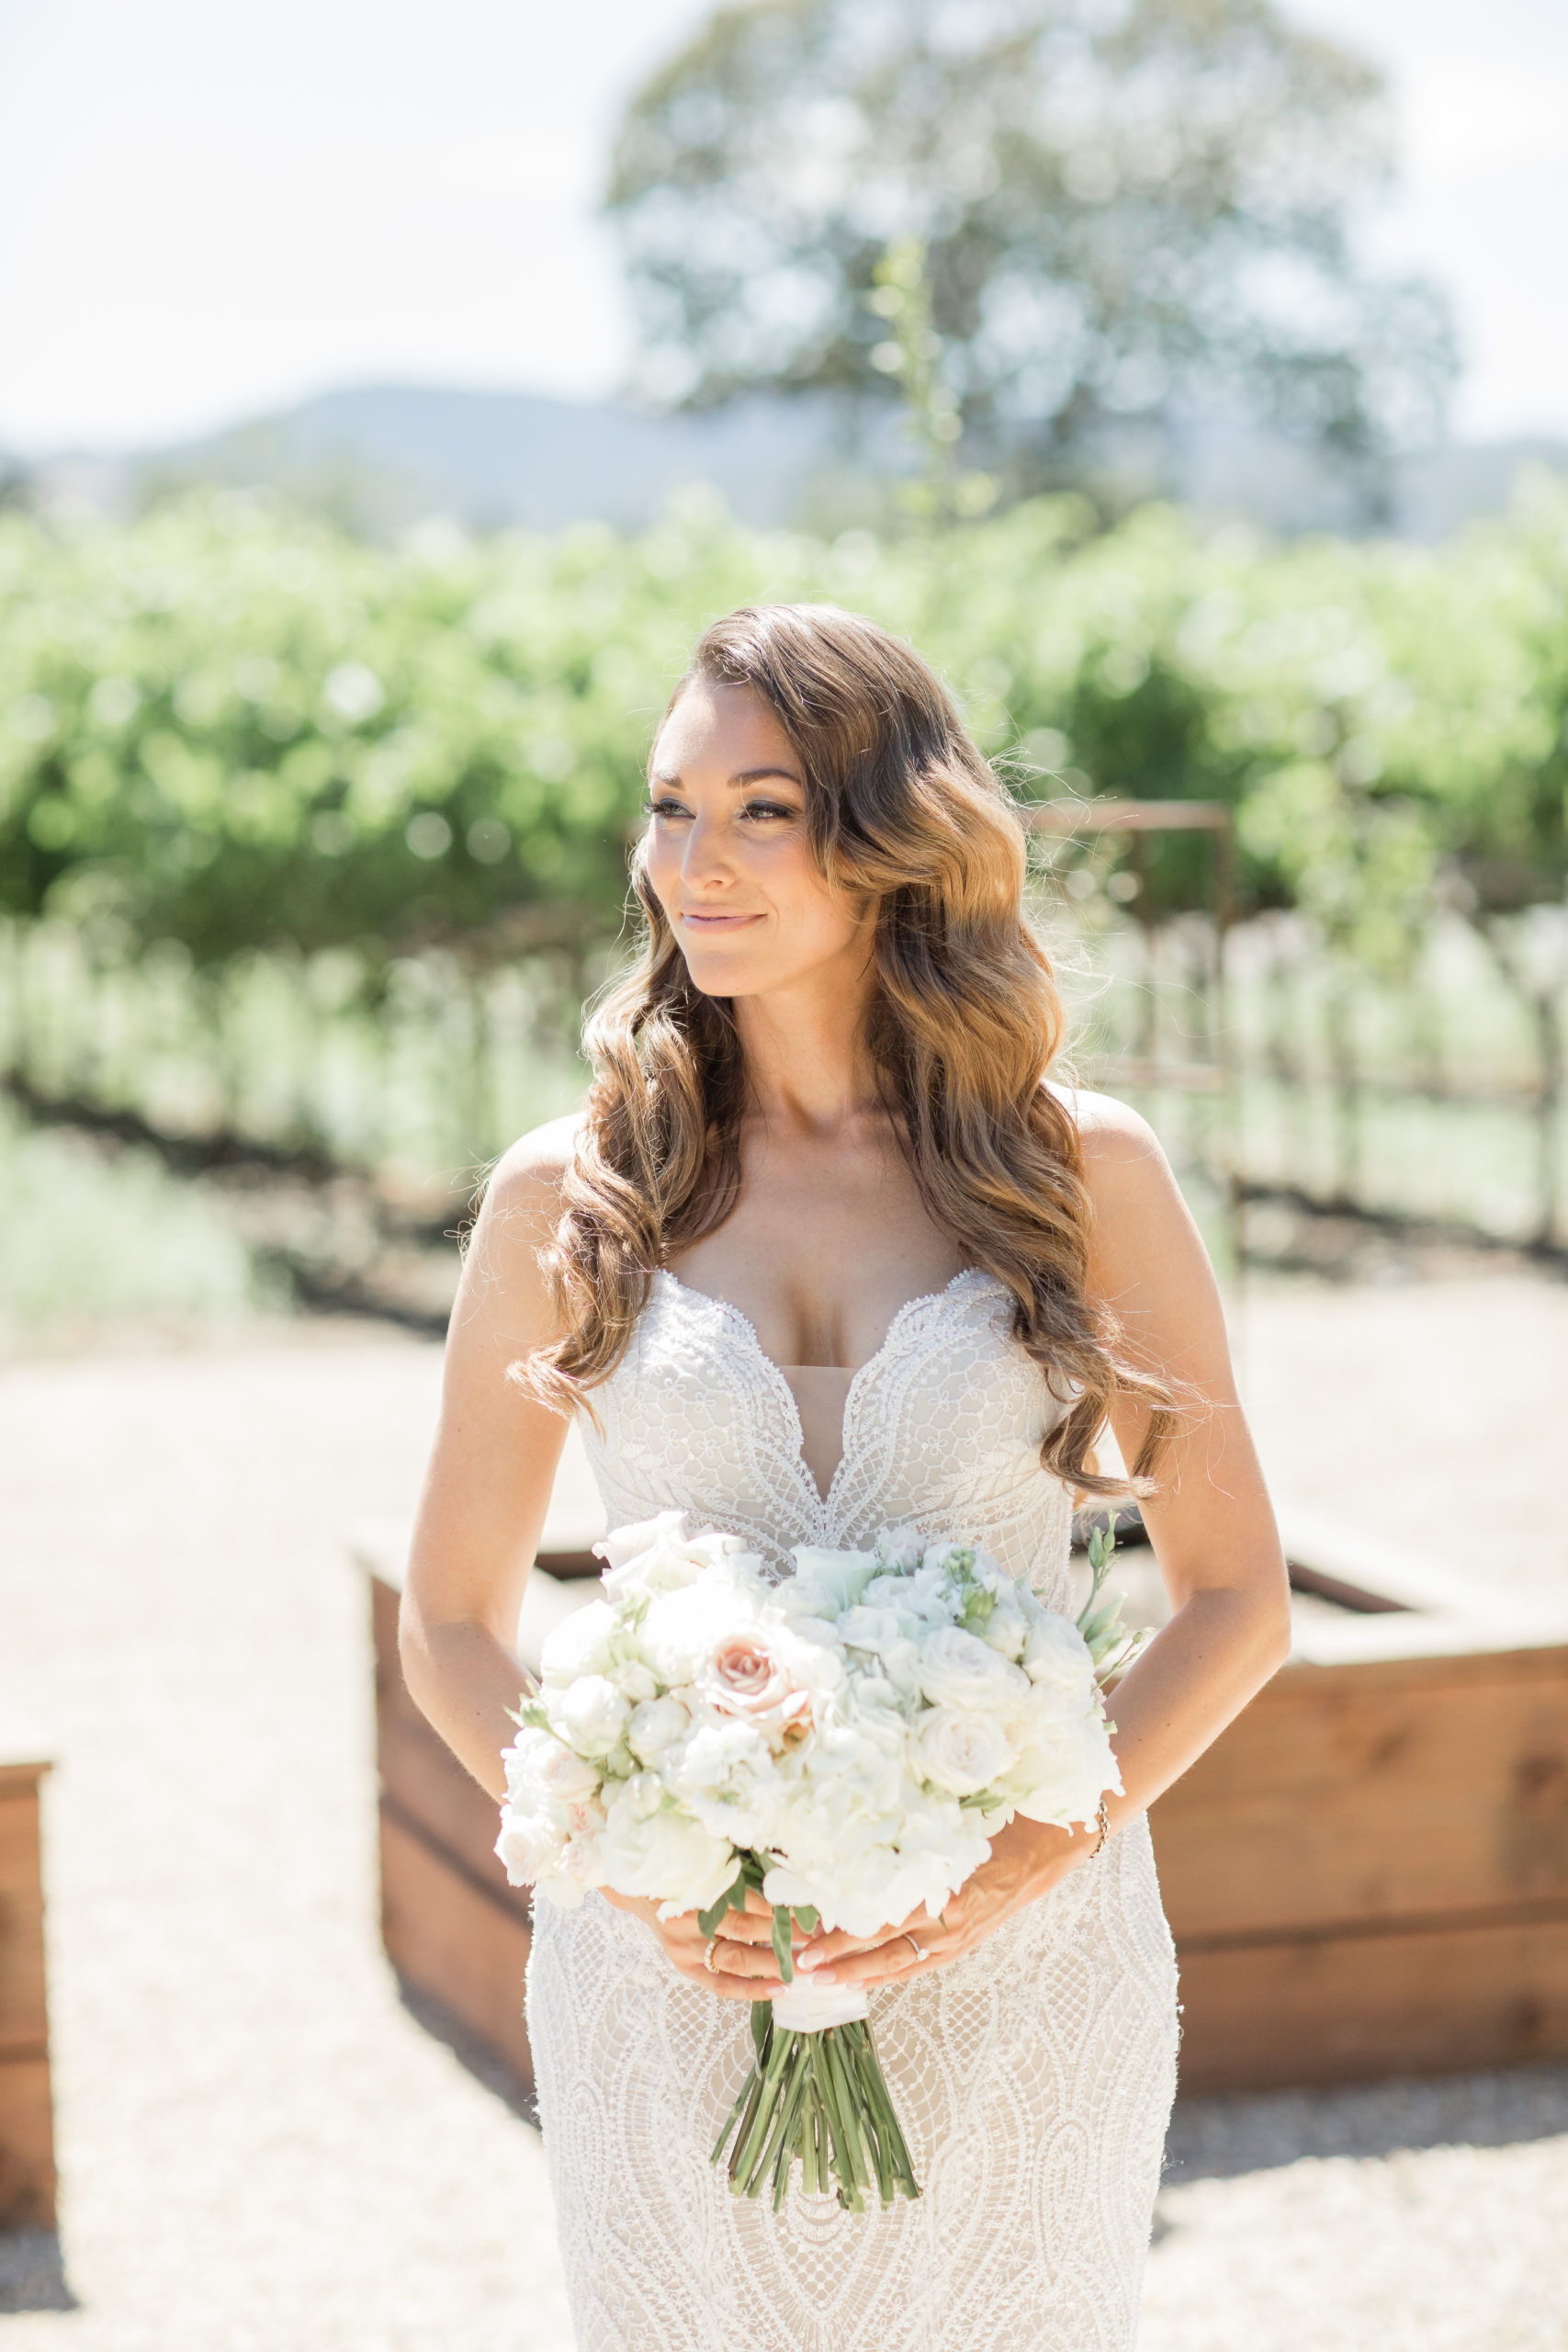 Tara outside in front of a vineyard in her wedding dress and veil, holding her bouquet and looking to the right and smiling.